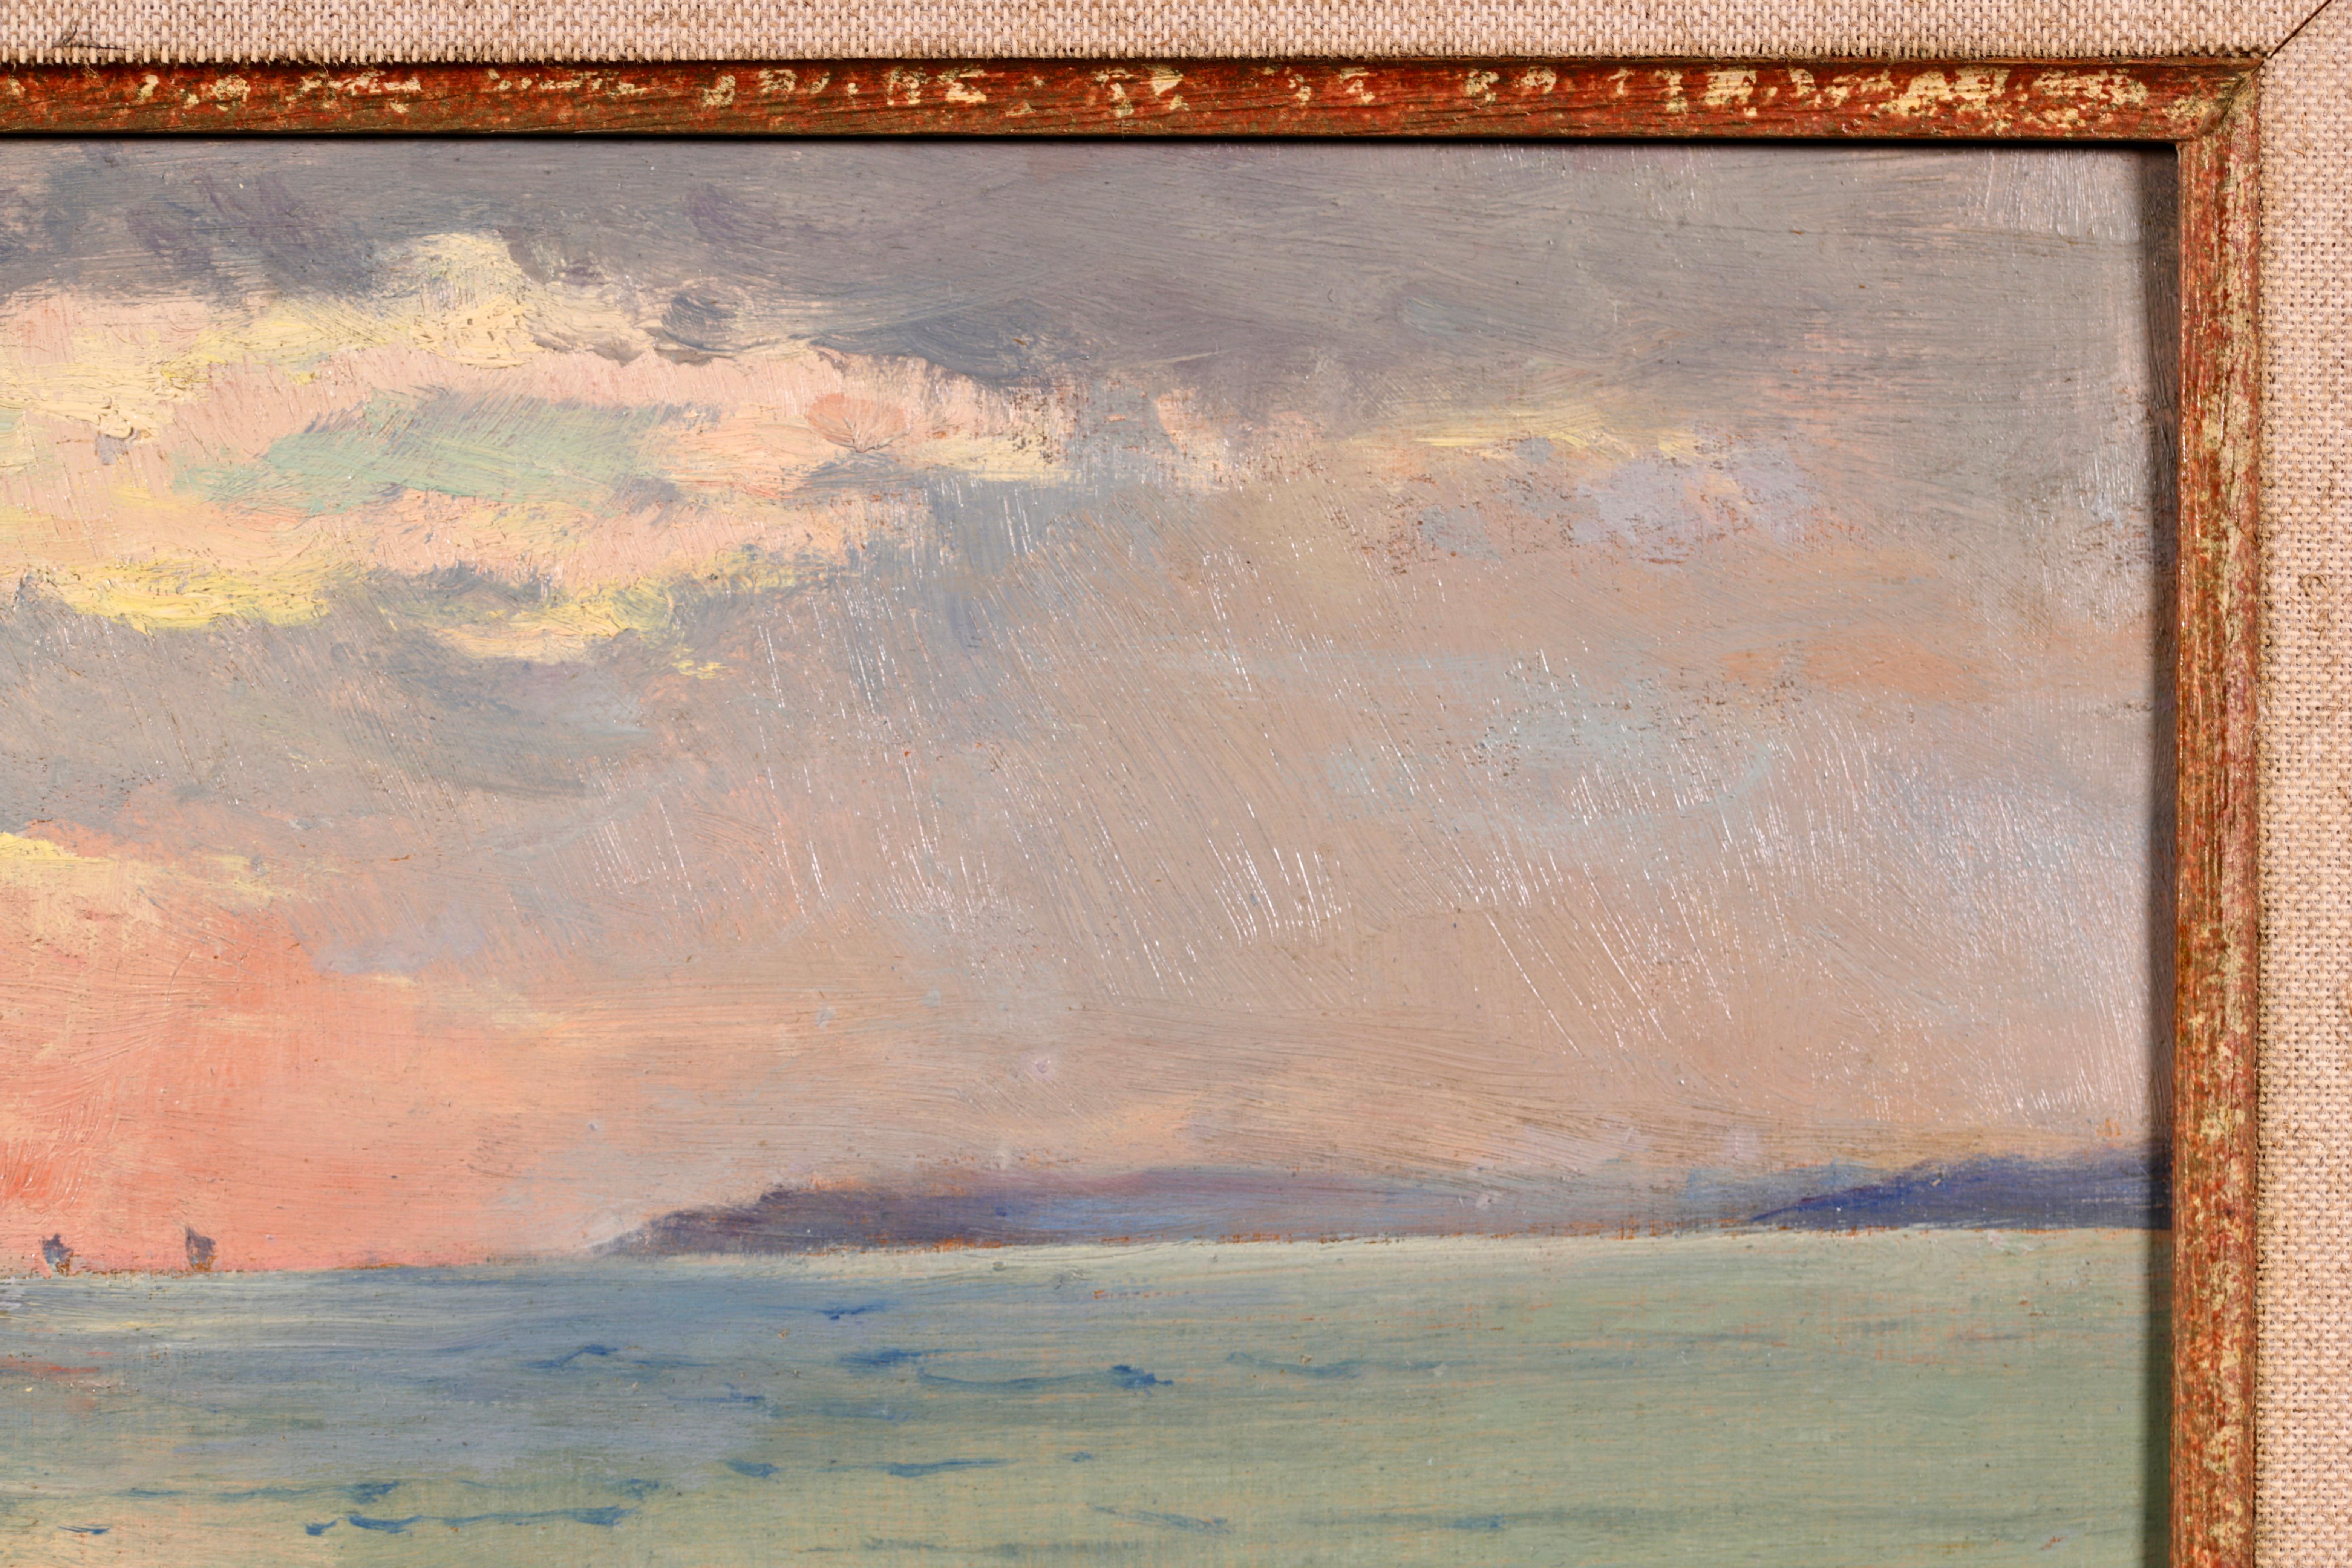 Signed oil on panel seascape by Canadian impressionist painter William Blair Bruce. The work depicts a blue-green sea with light breaking through the clouds and illuminating a line across the water. Small birds can be seen on the beach and the sun